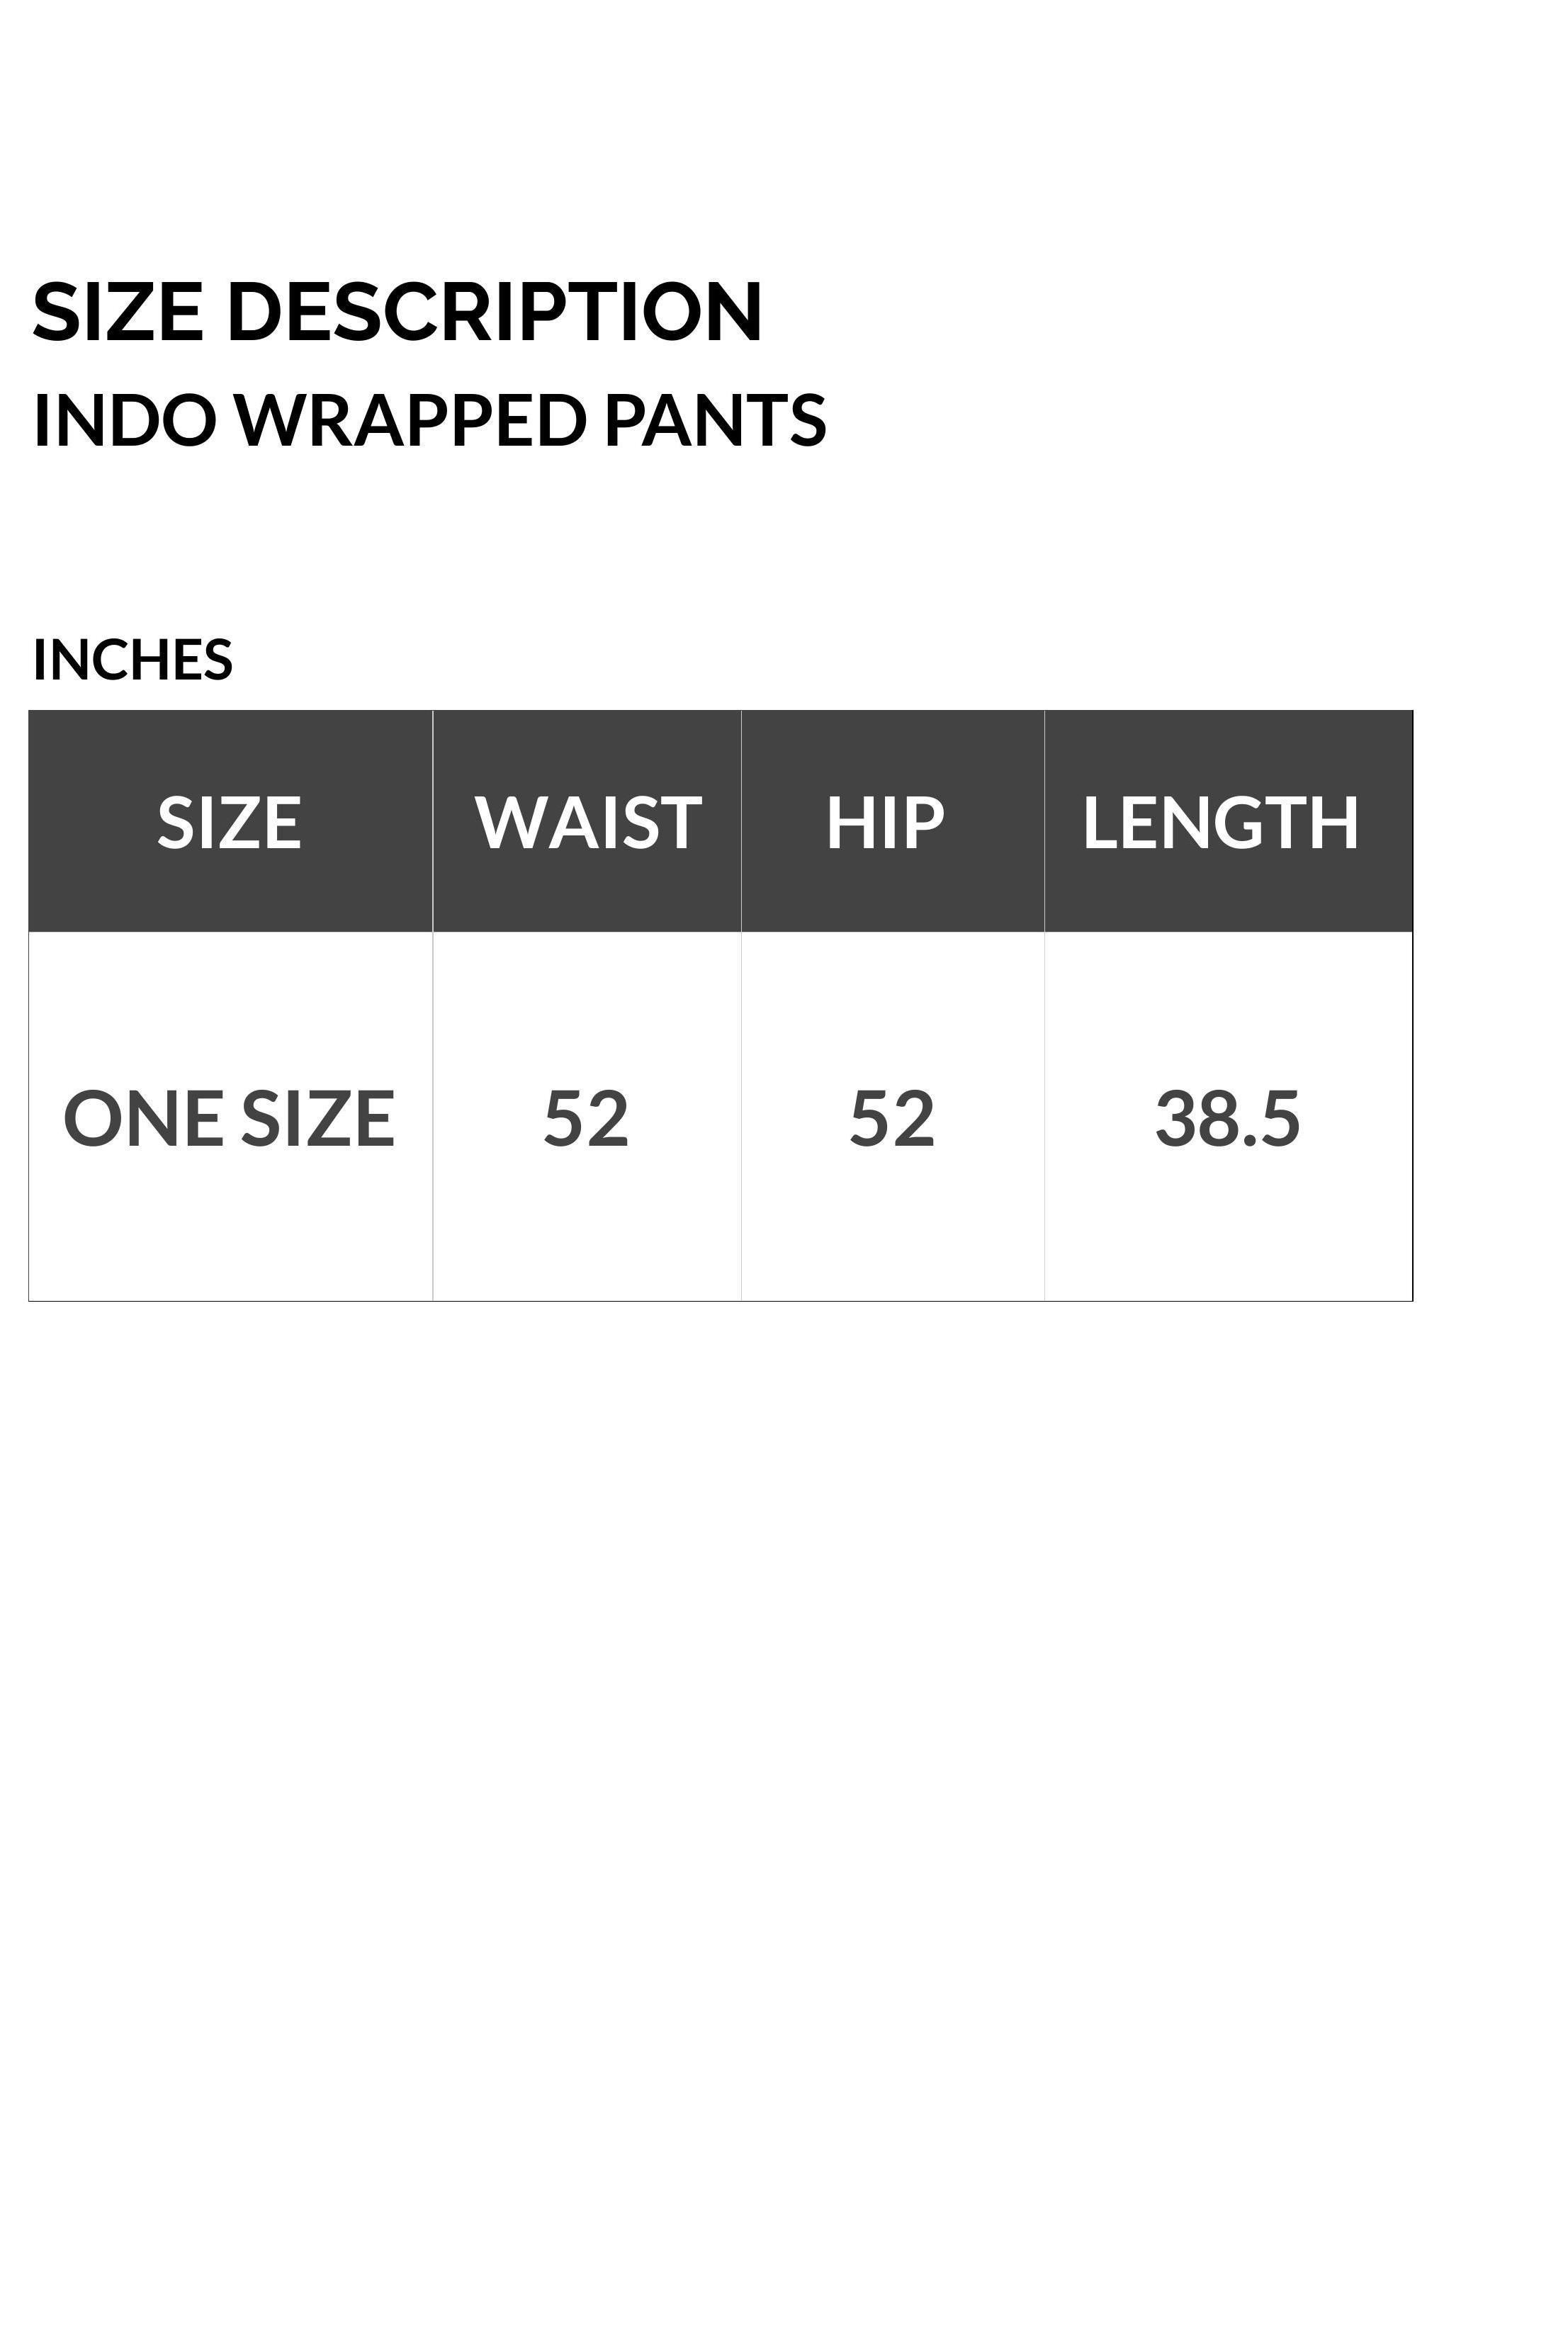 SIZE WRAPPED PANTS